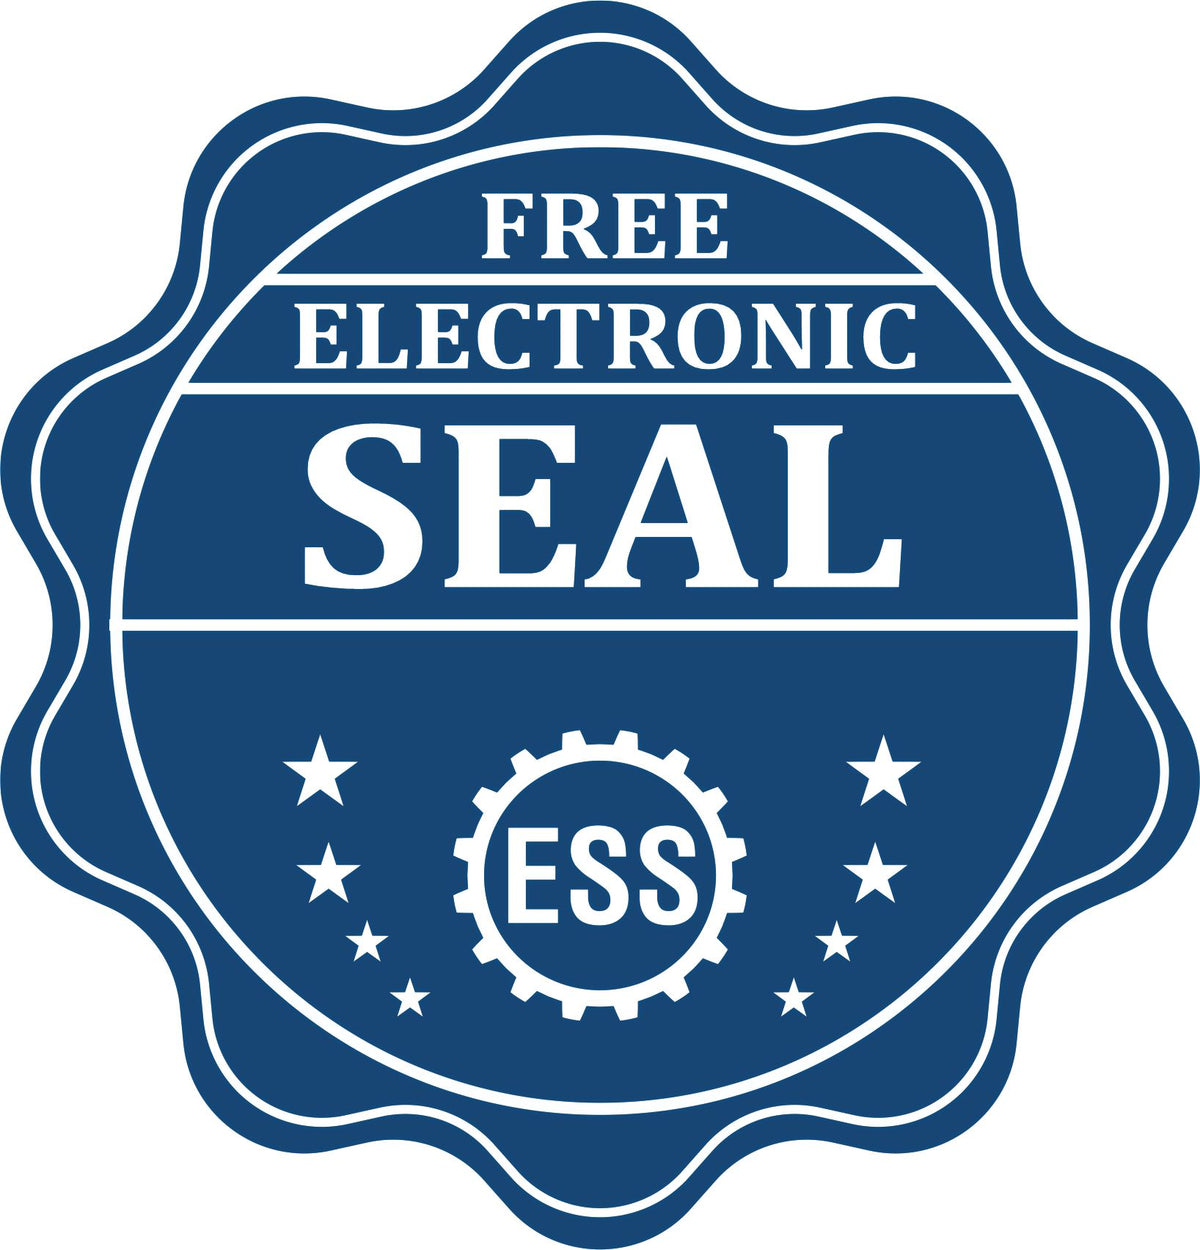 A badge showing a free electronic seal for the Gift New York Landscape Architect Seal with stars and the ESS gear on the emblem.